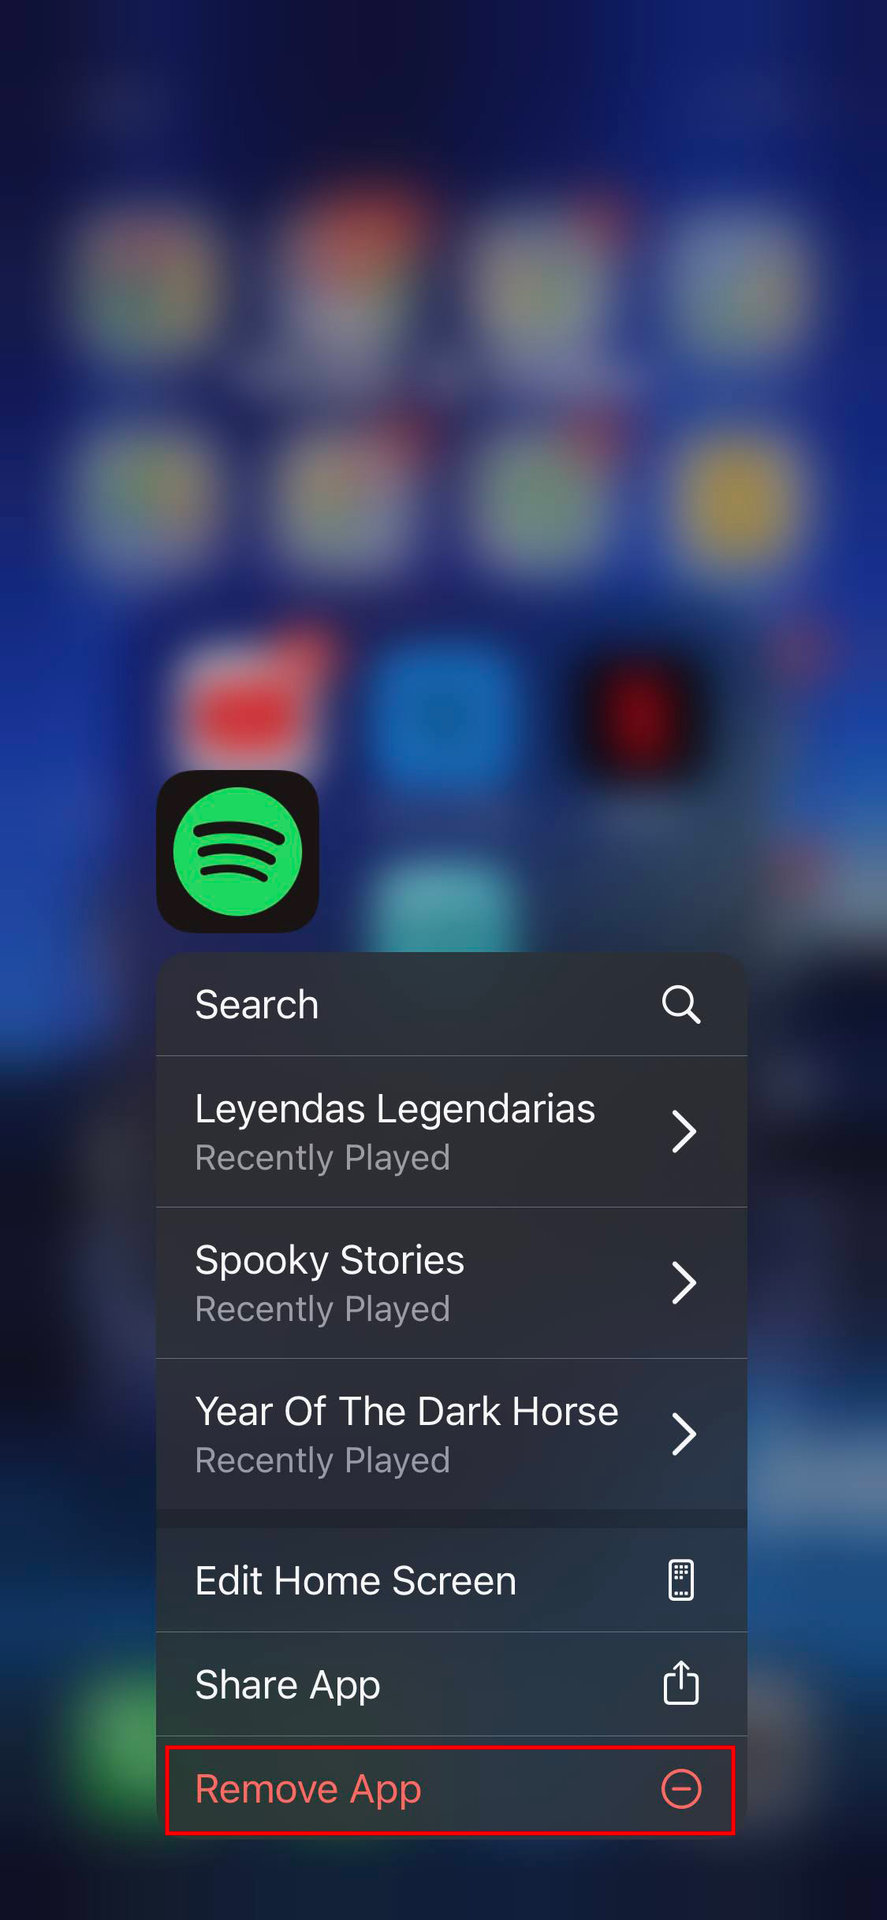 How to uninstall Spotify on iPhone 2